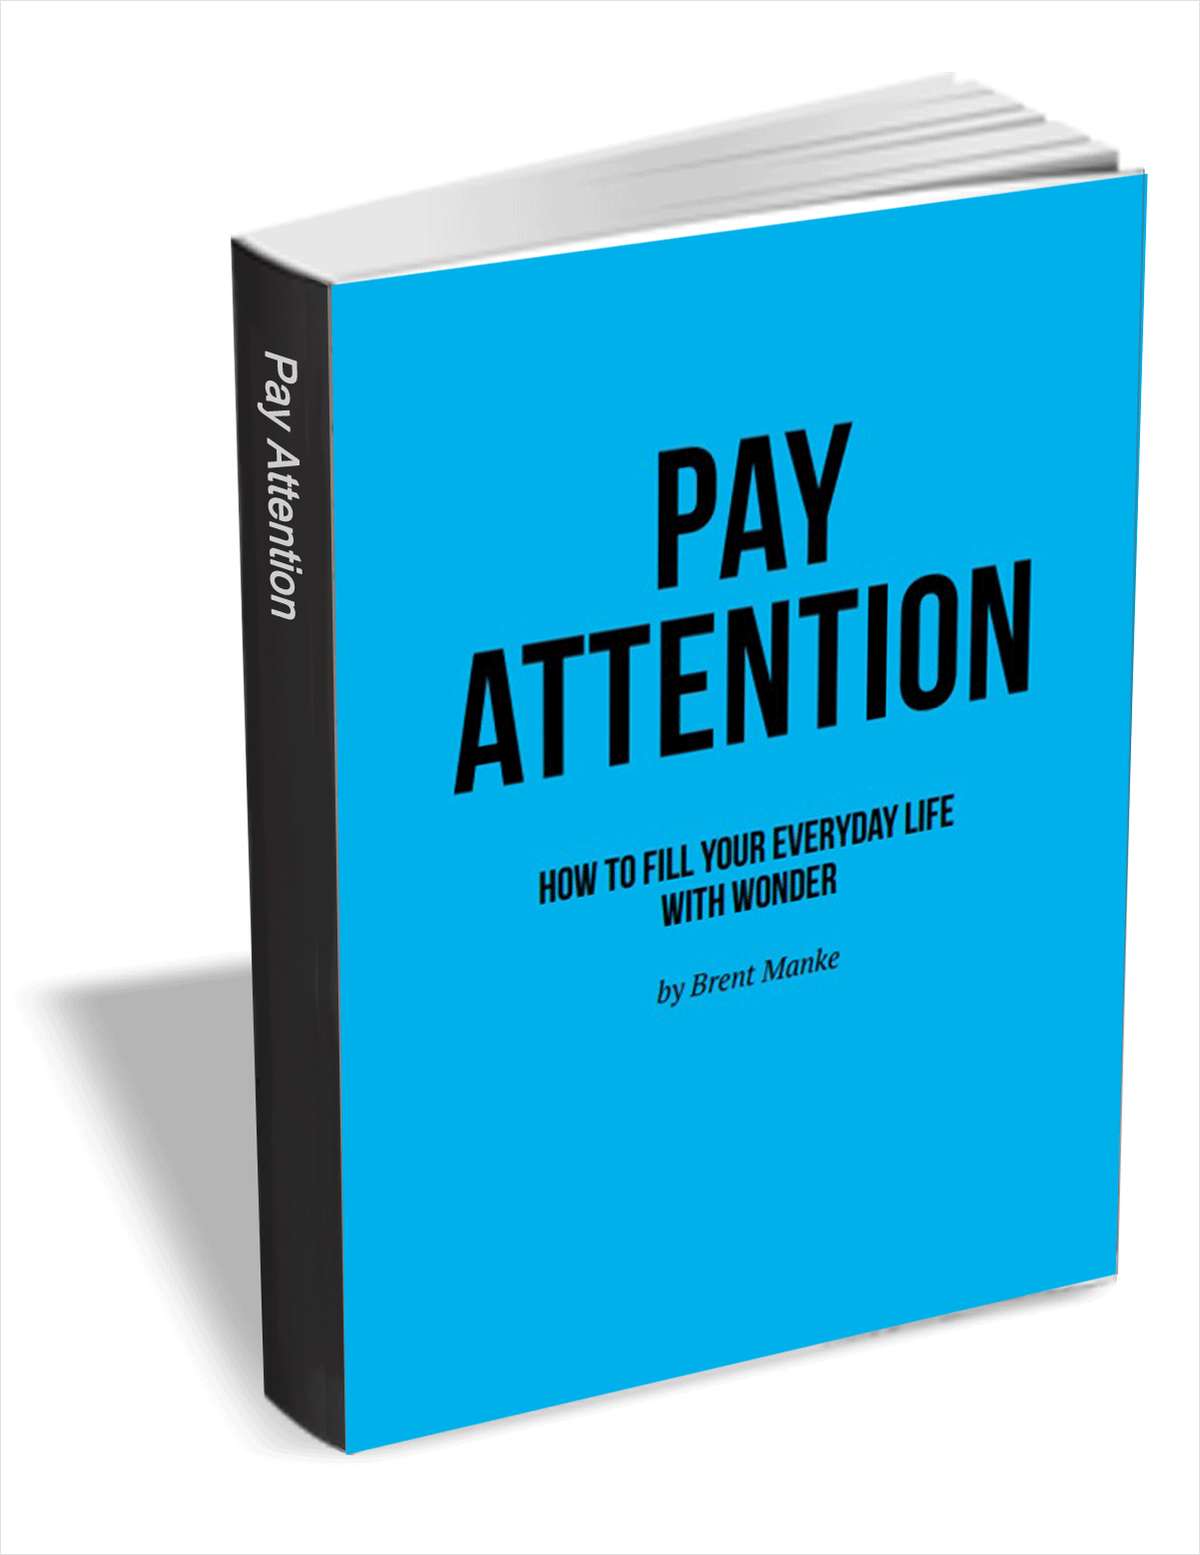 Pay Attention - How to Fill Your Everyday Life with Wonder